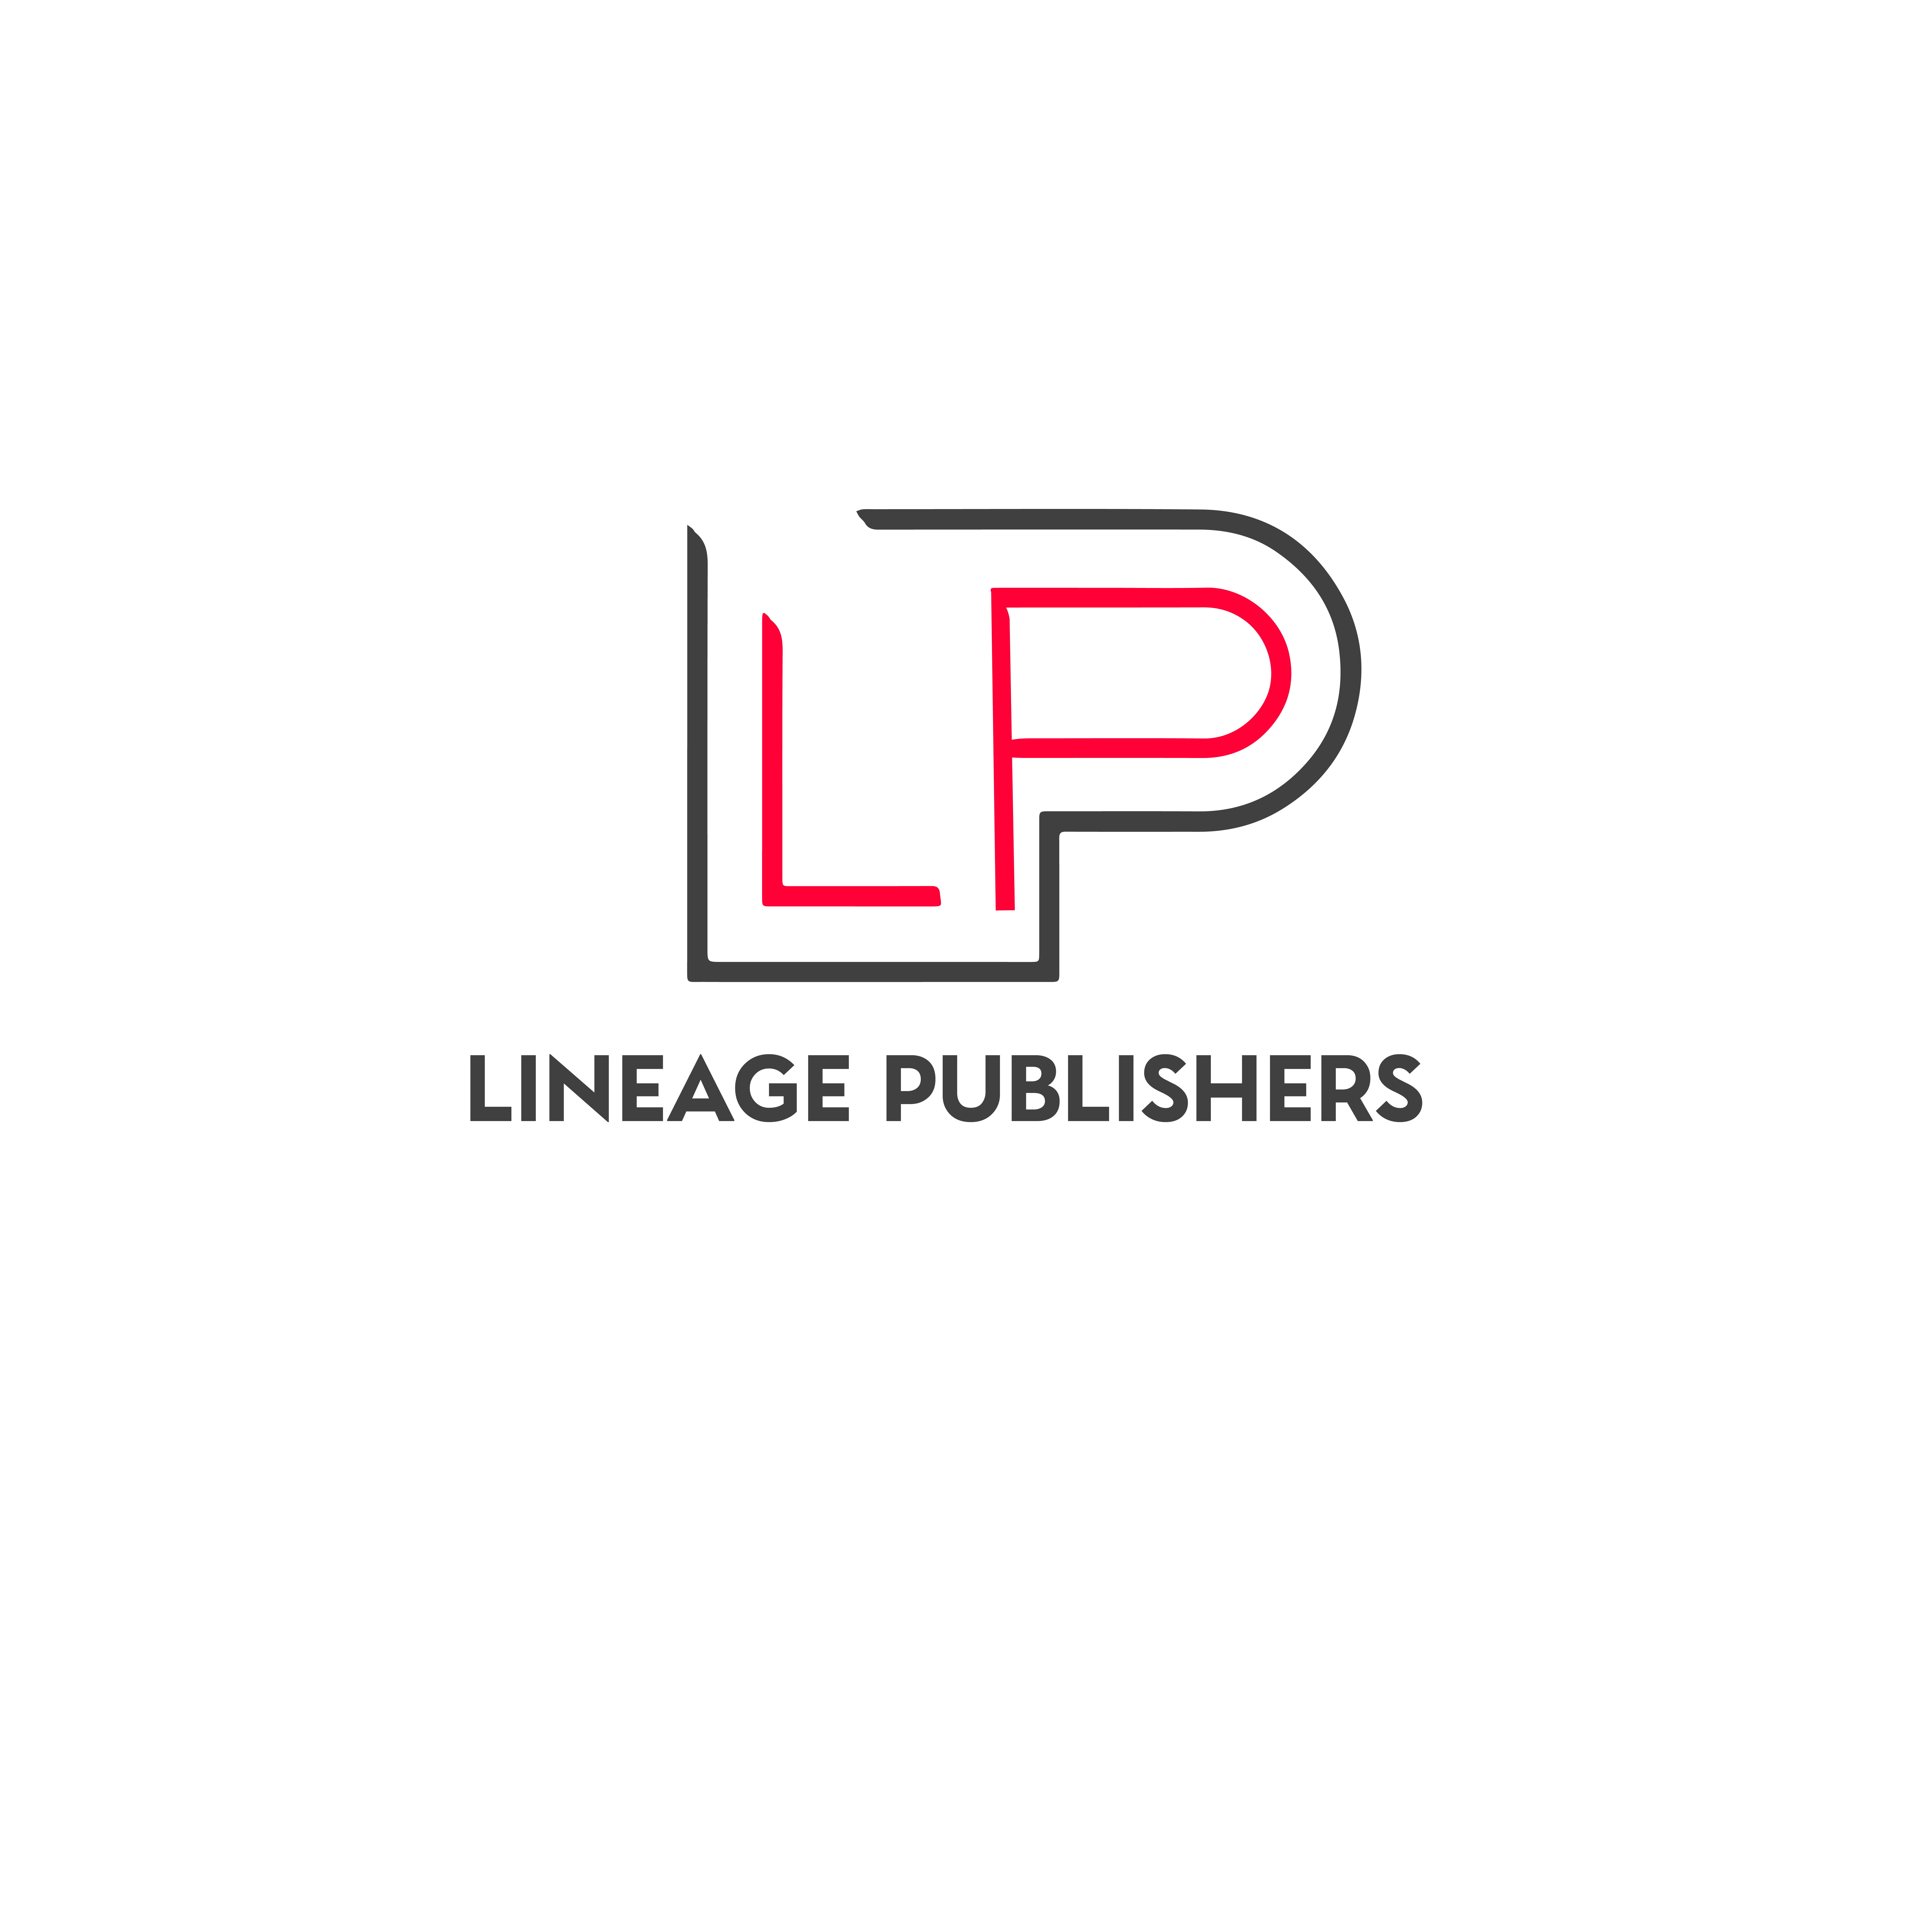 Company logo of Lineage Publishers